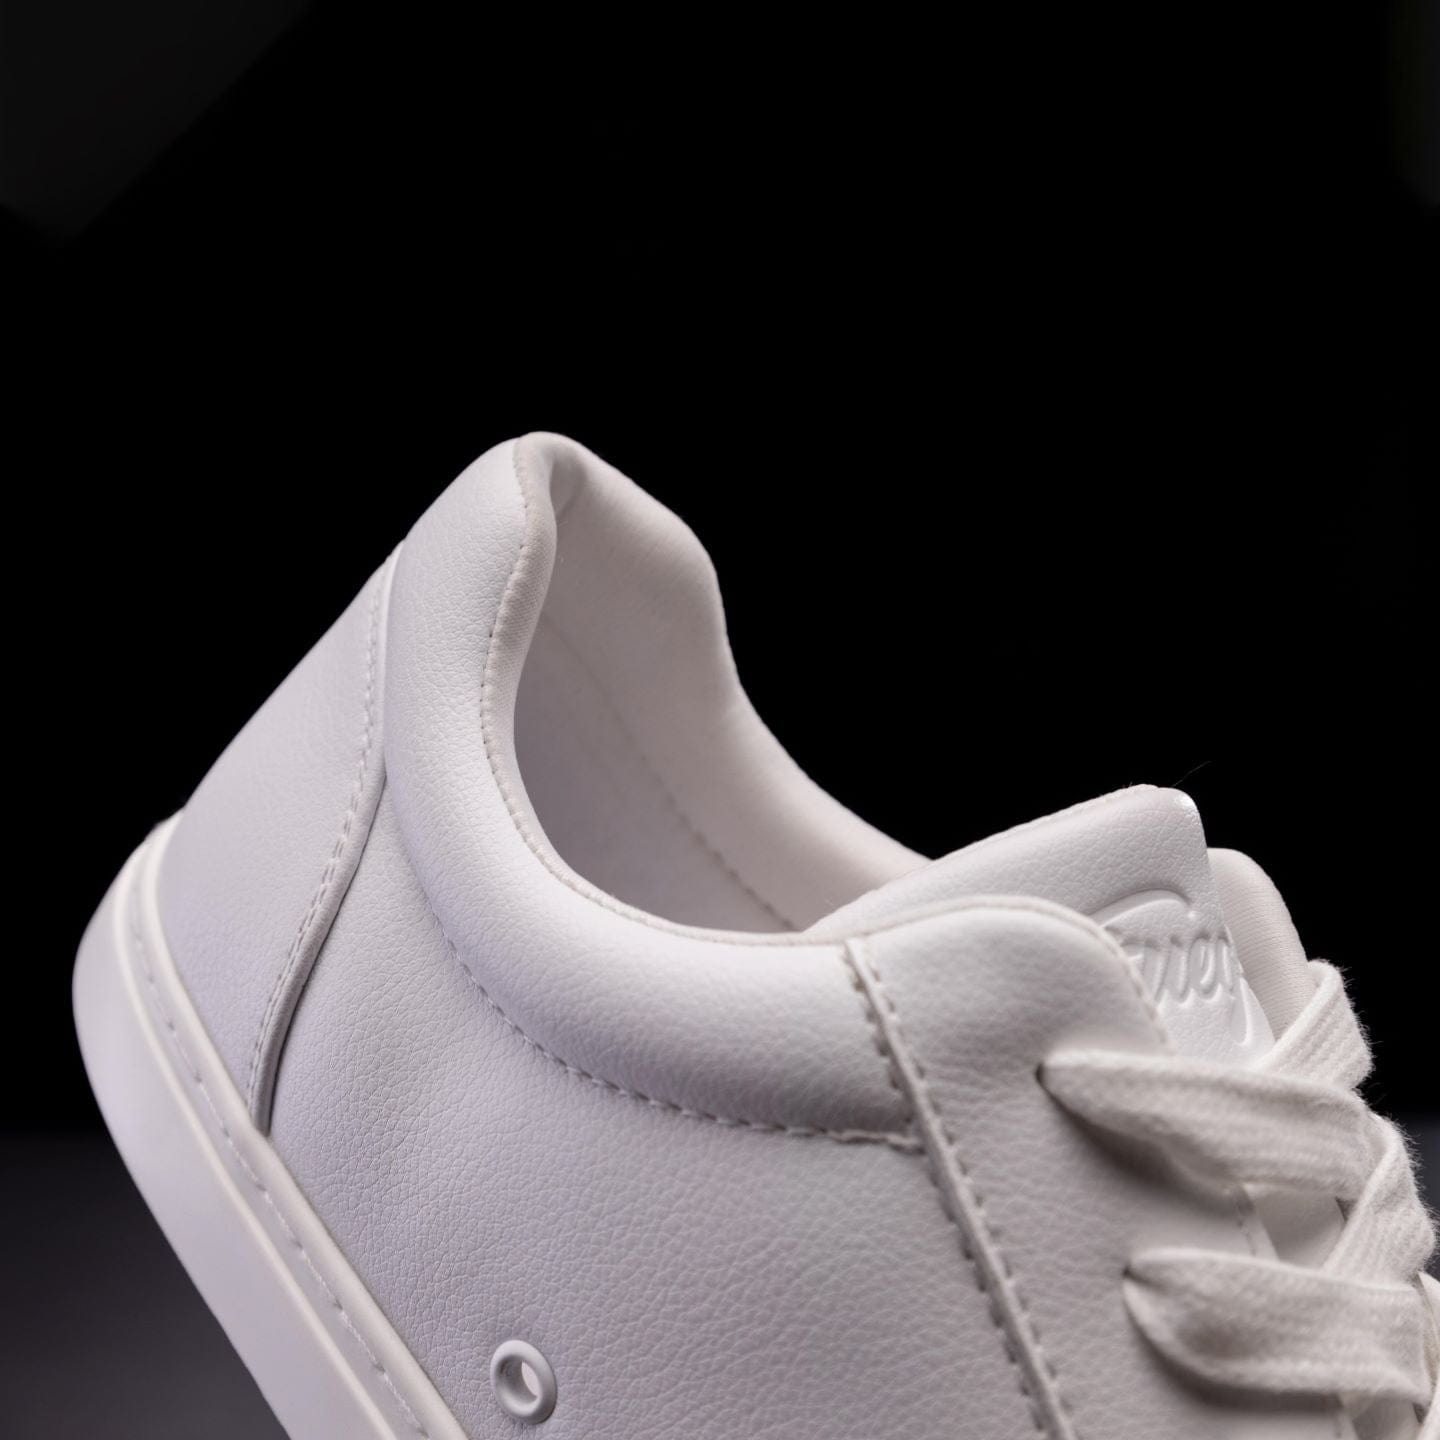 Low-top Casual Sneaker Shoes (Gray/White)